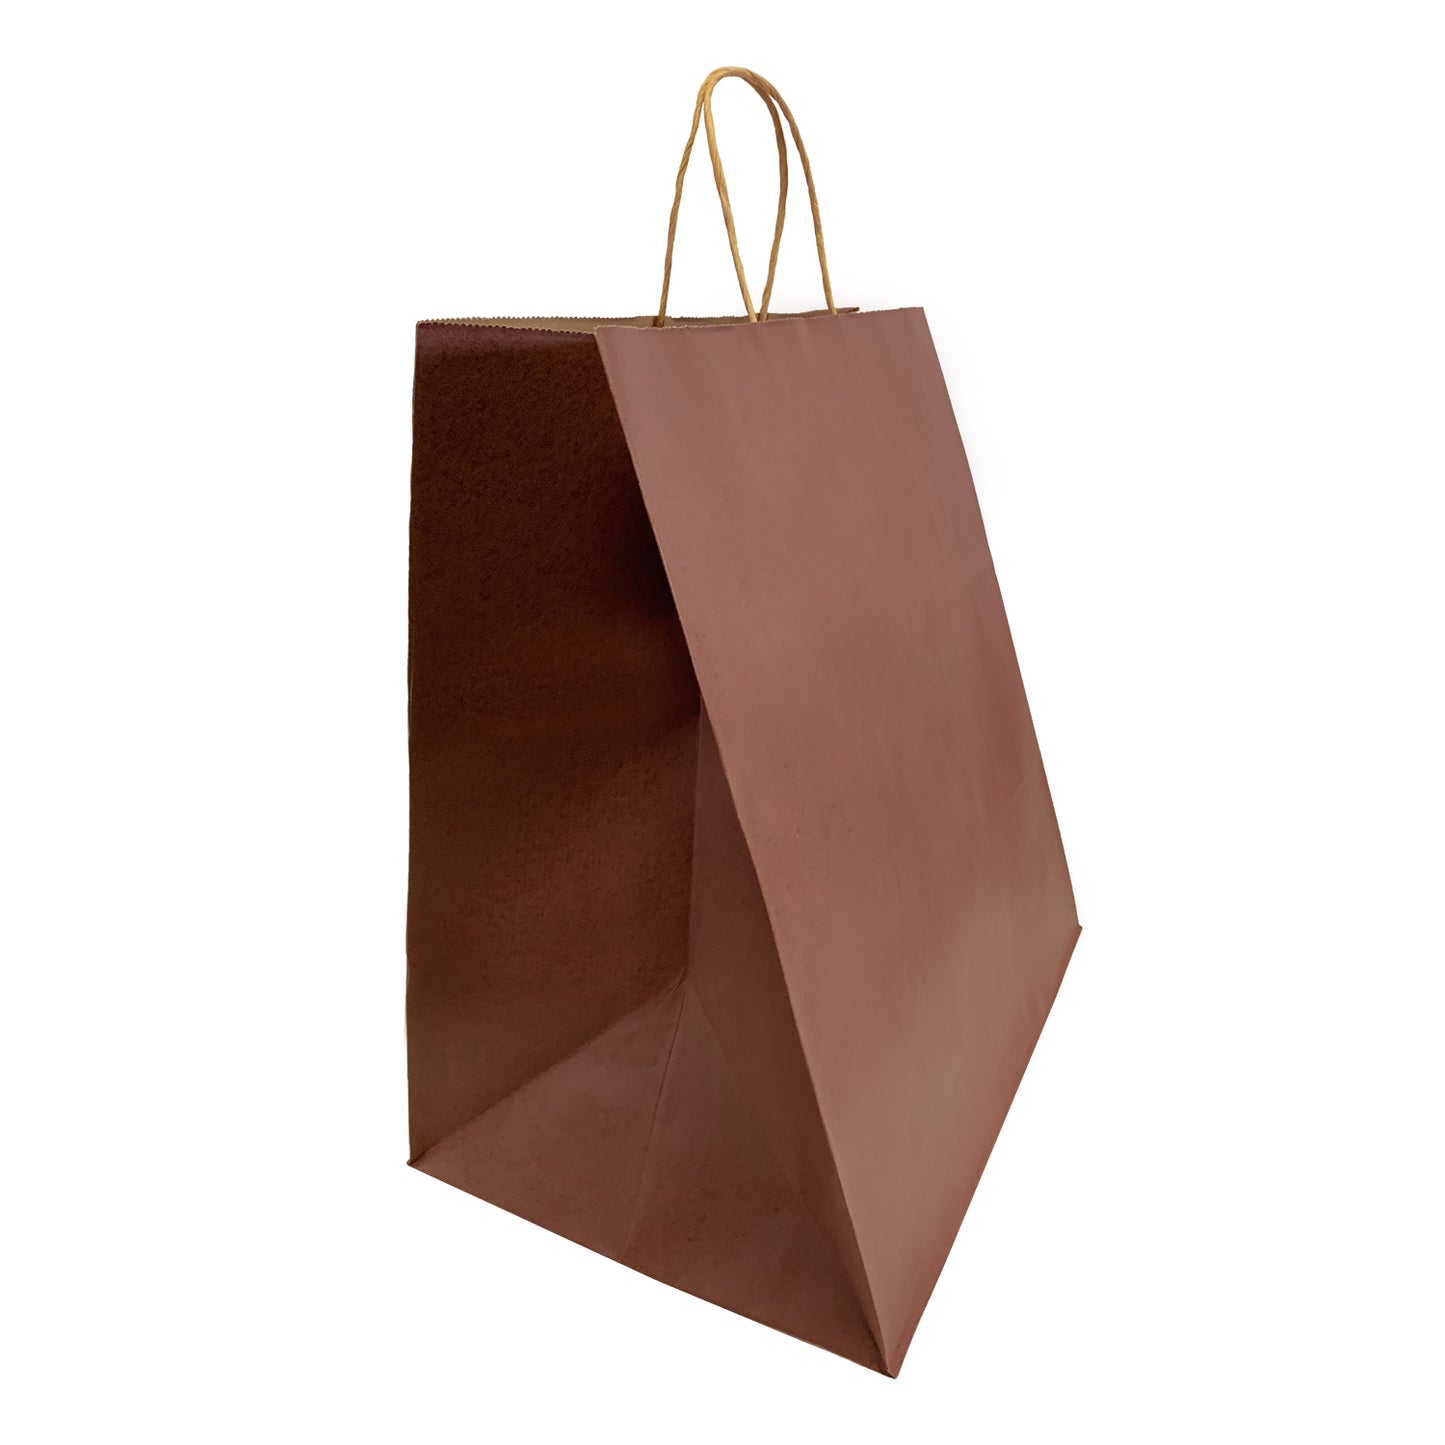 150 Pcs, Super Royal, 14x10x15.75 inches, Chocolate Kraft Paper Bags, with Twisted Handle